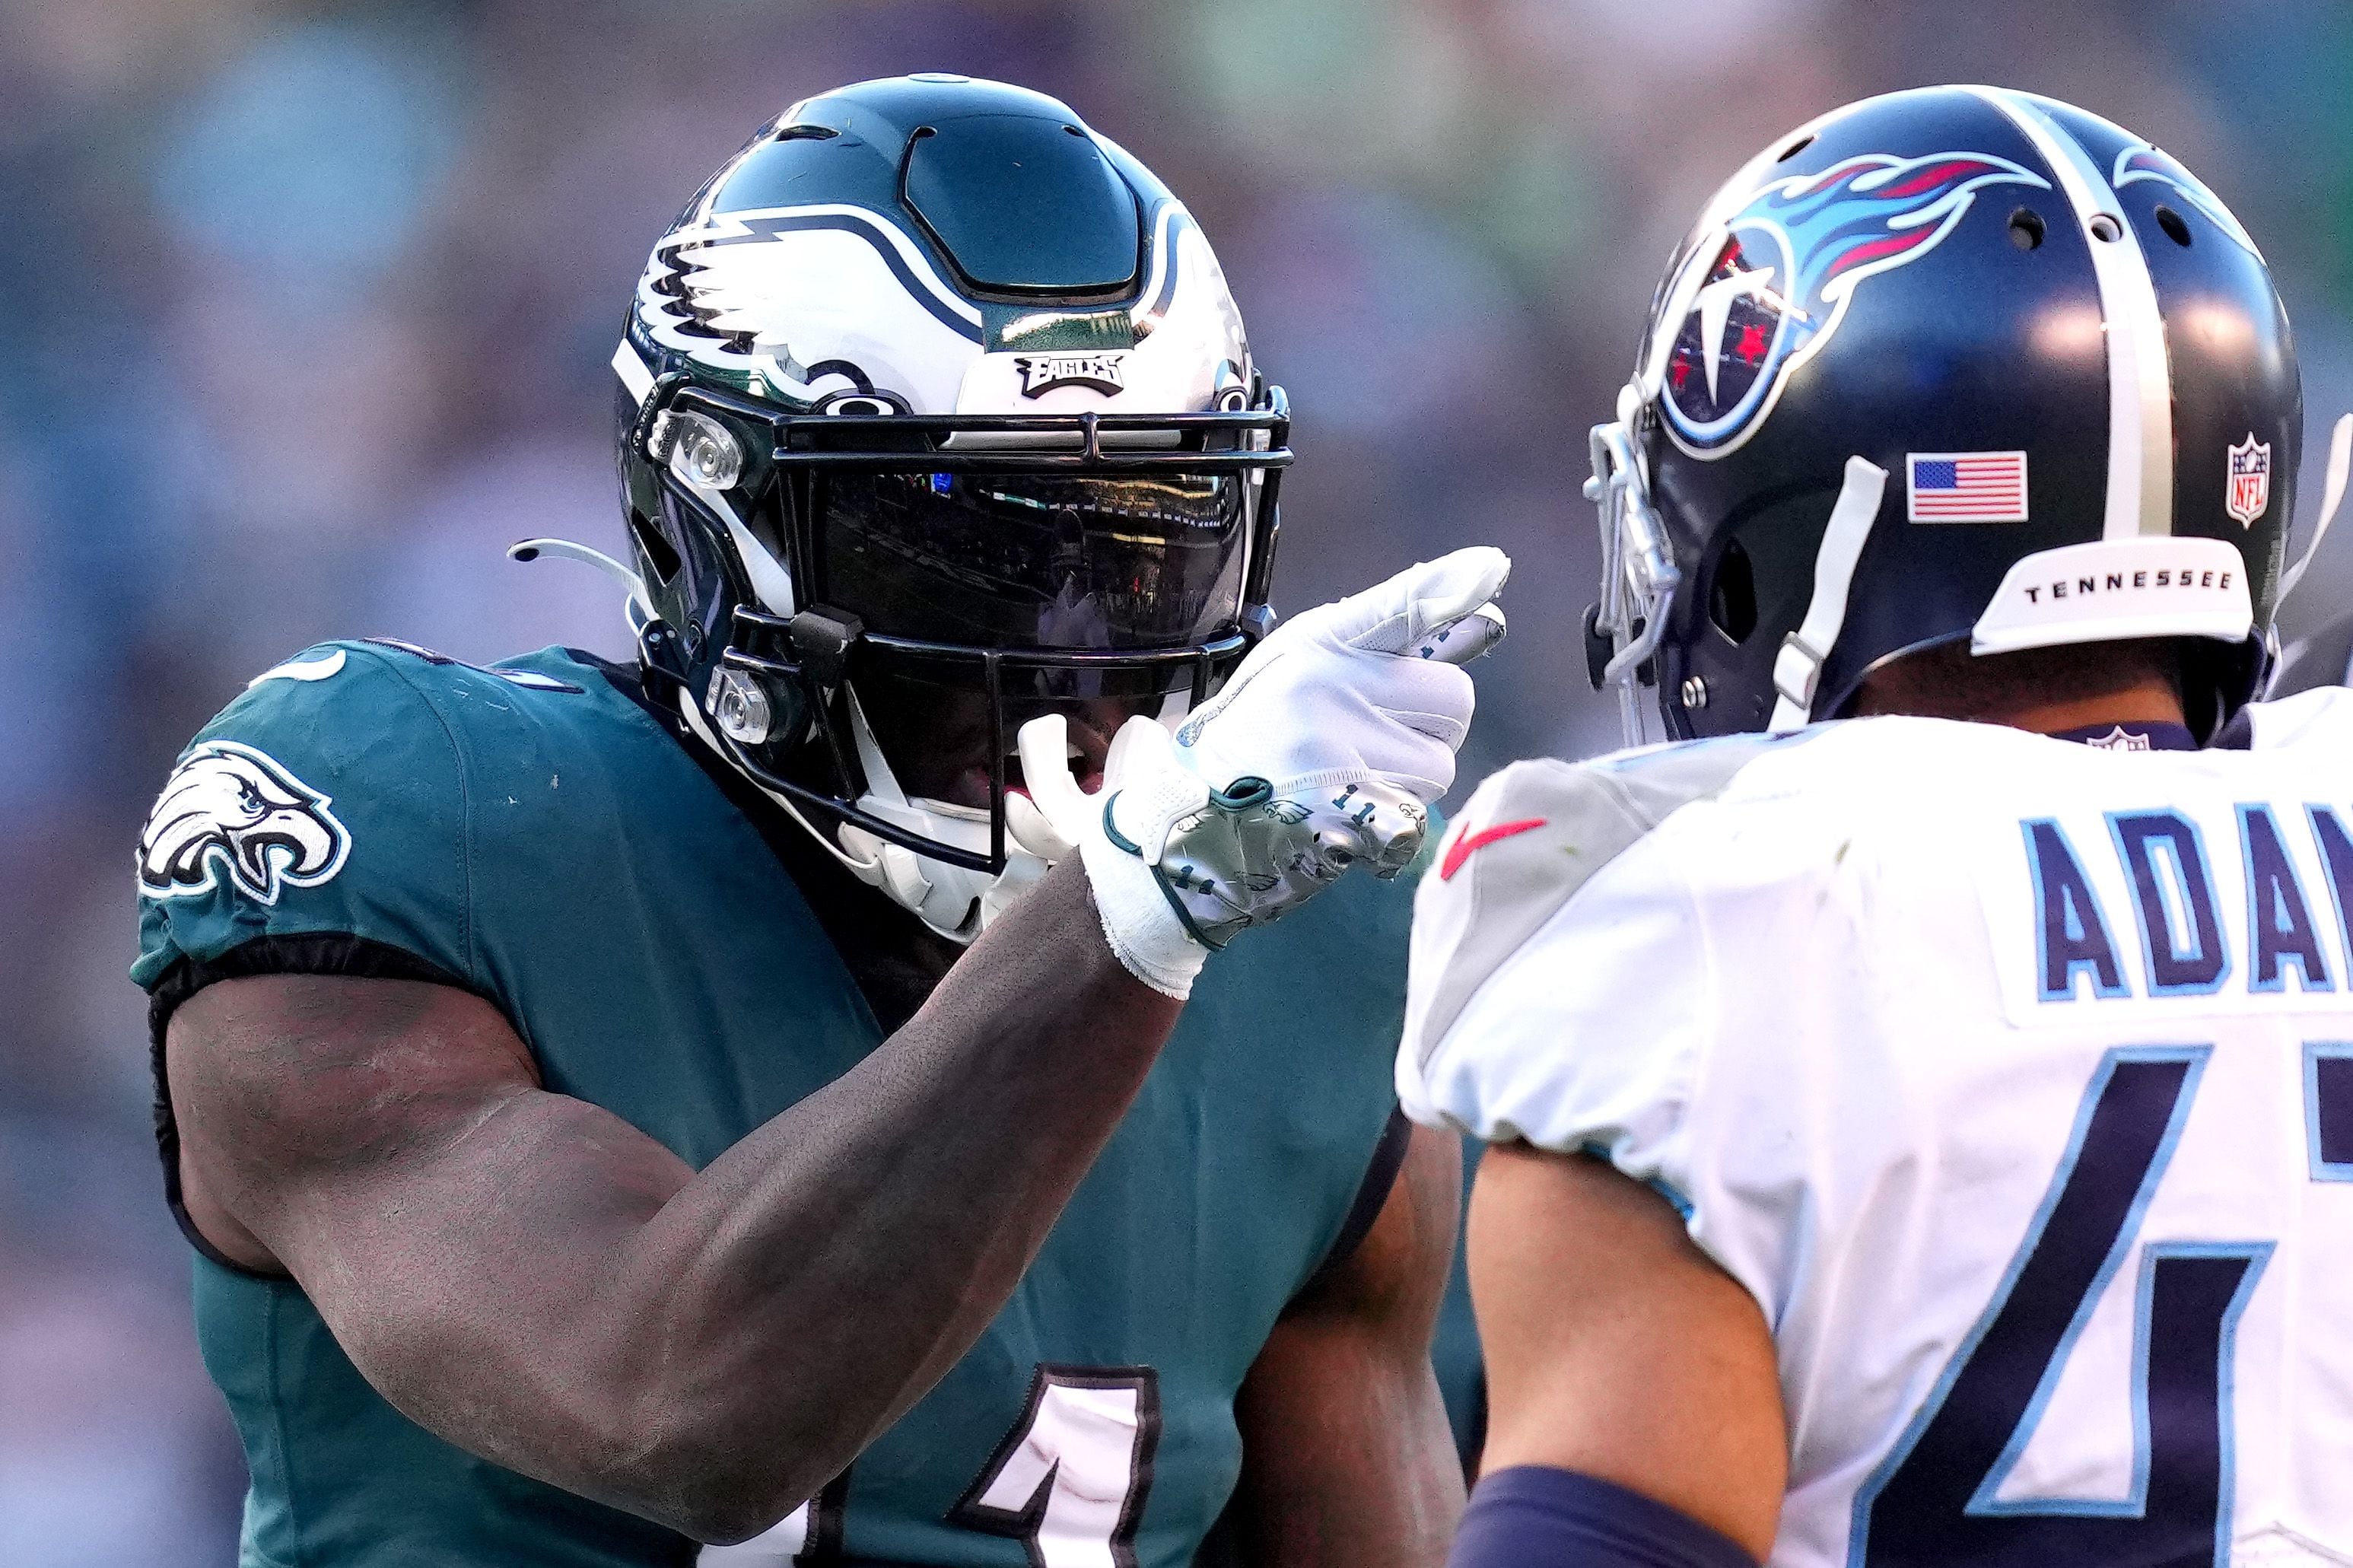 Giants' Surprising Season Ends With a Dominant Eagles Win - The